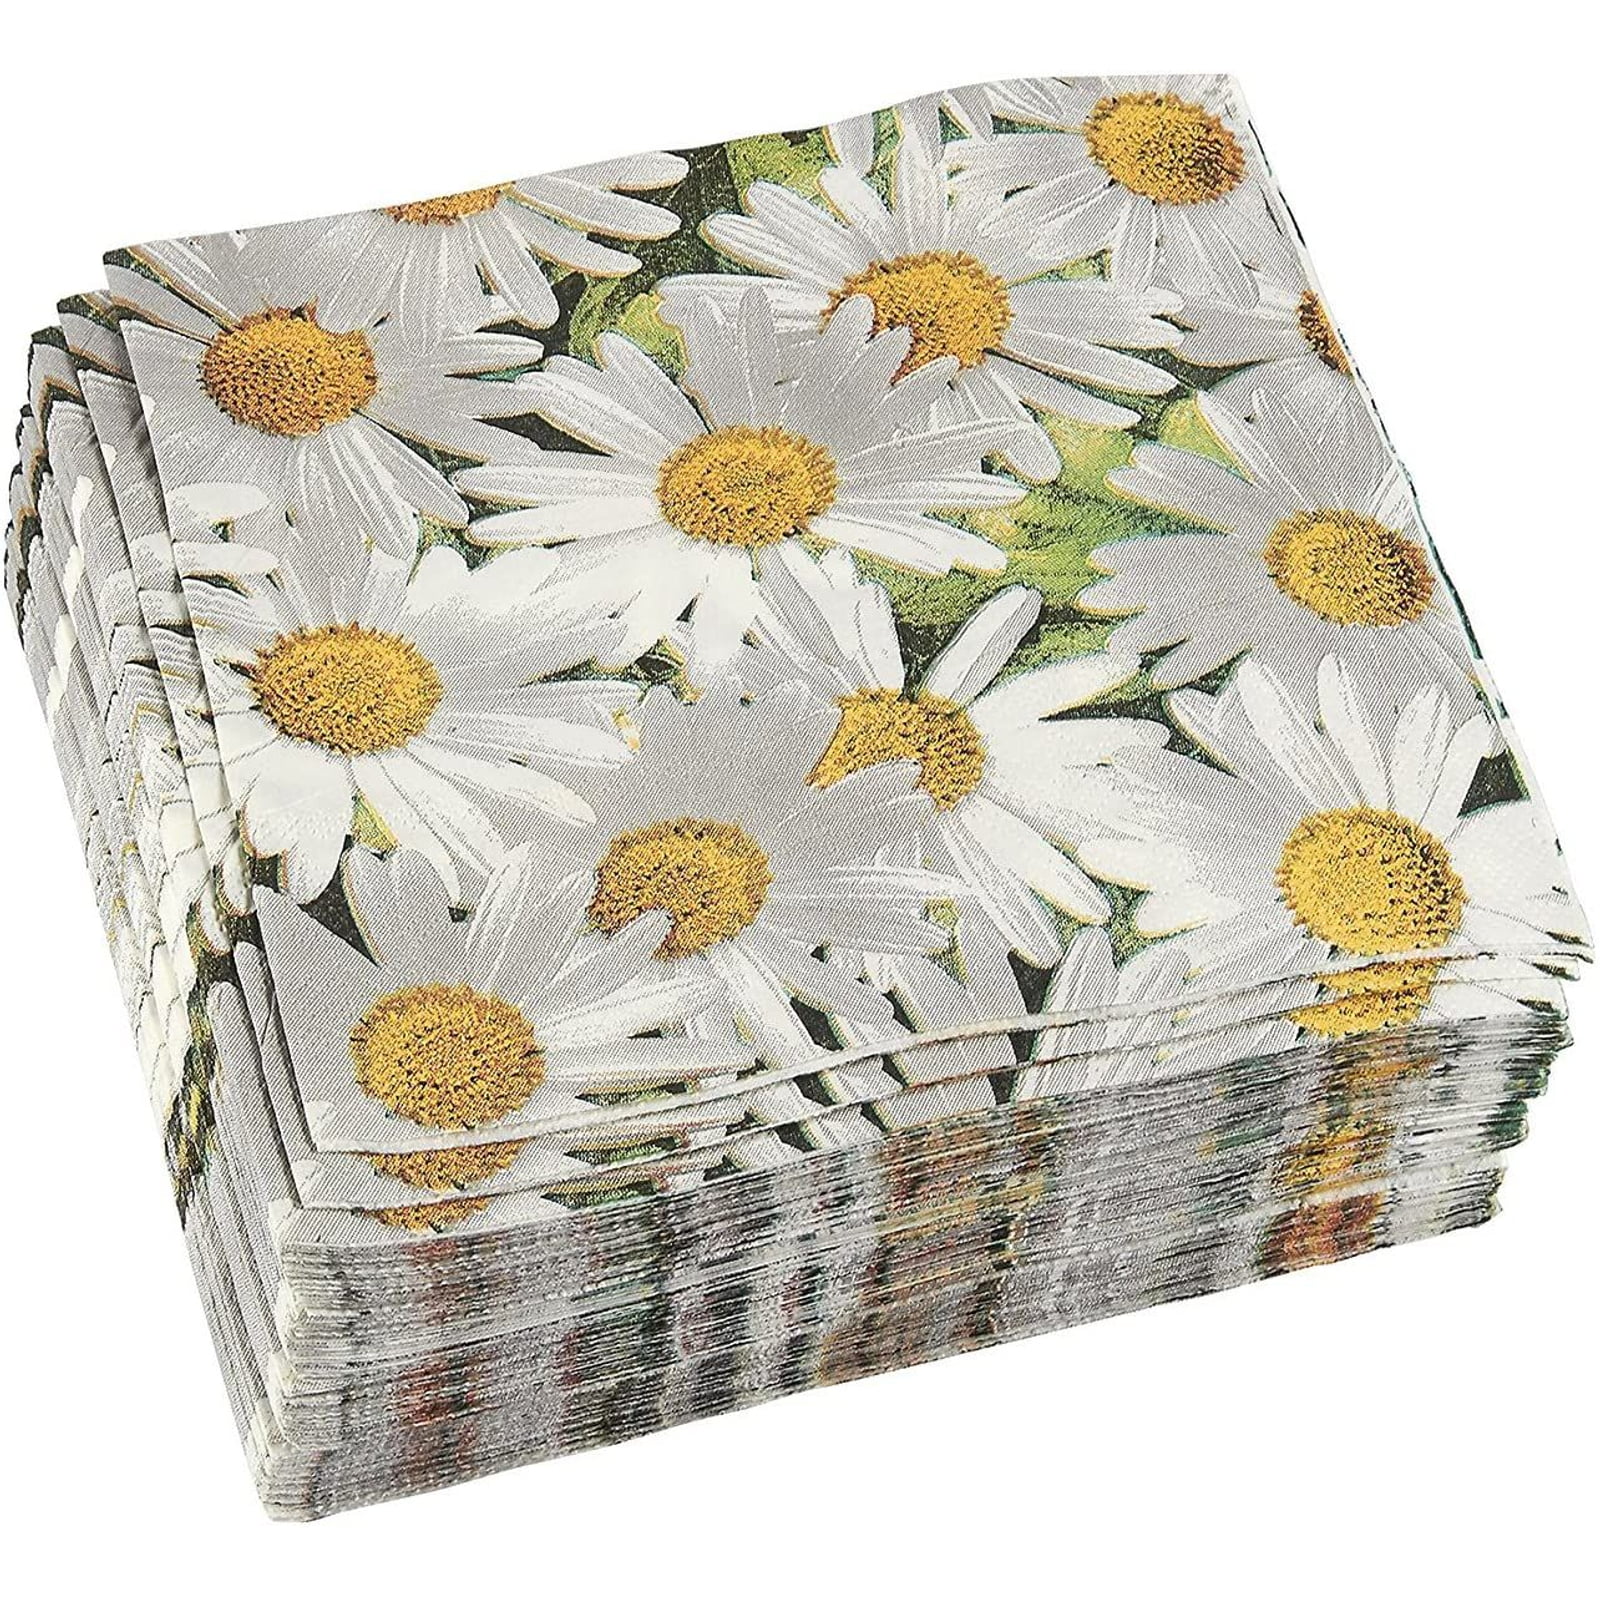 TWO Individual Paper Luncheon Decoupage Napkins DAISY 67 FLOWER SHASTA 